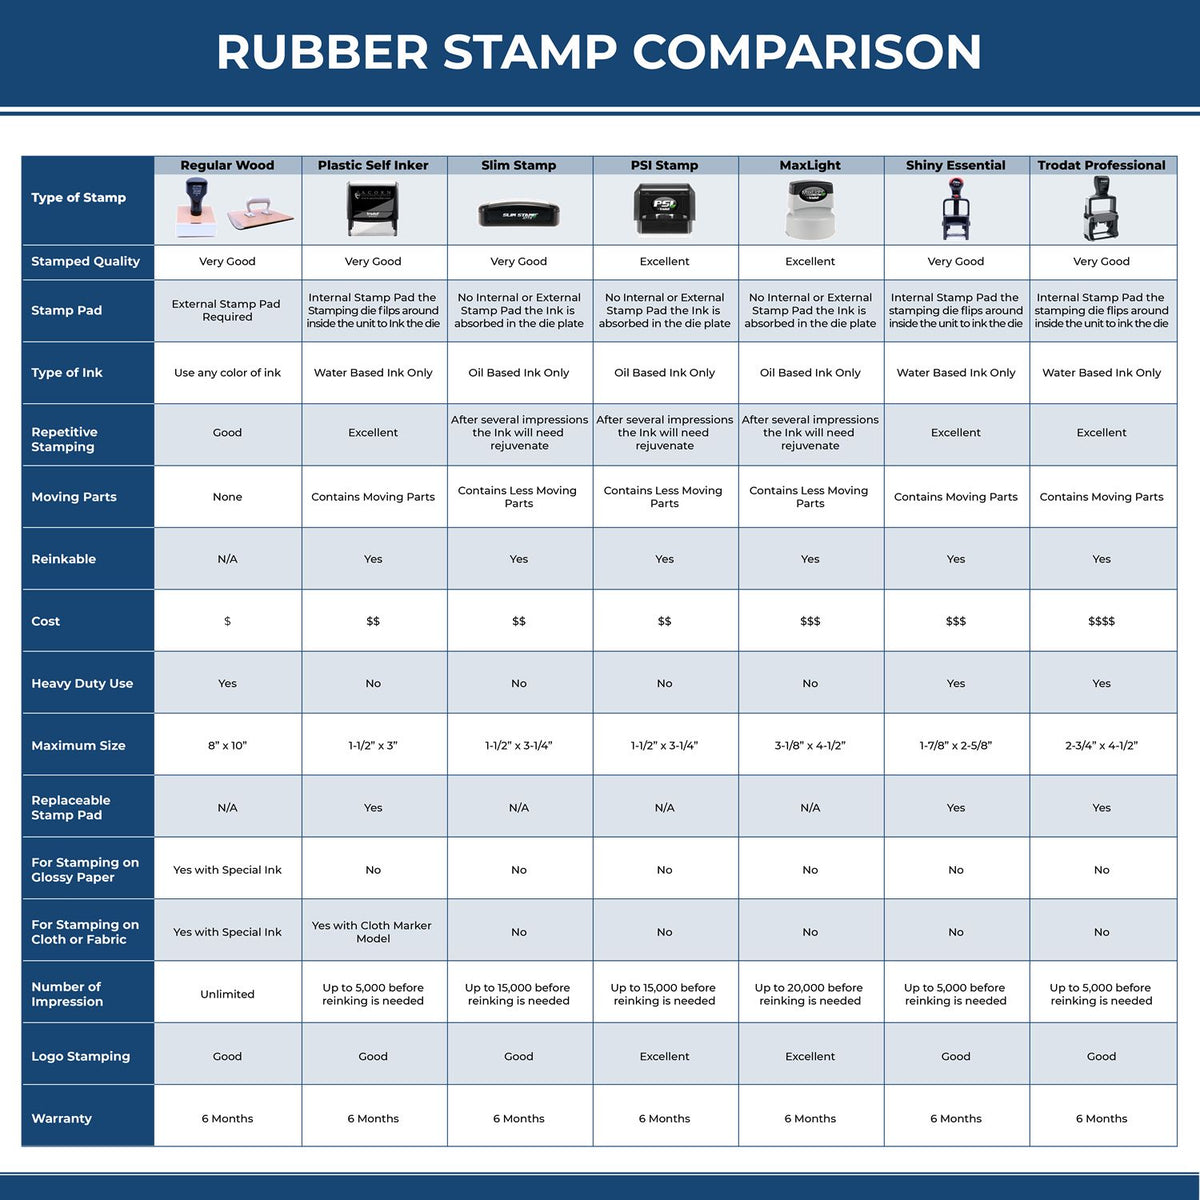 A comparison chart for the different types of mount models available for the Premium MaxLight Pre-Inked Washington Engineering Stamp.